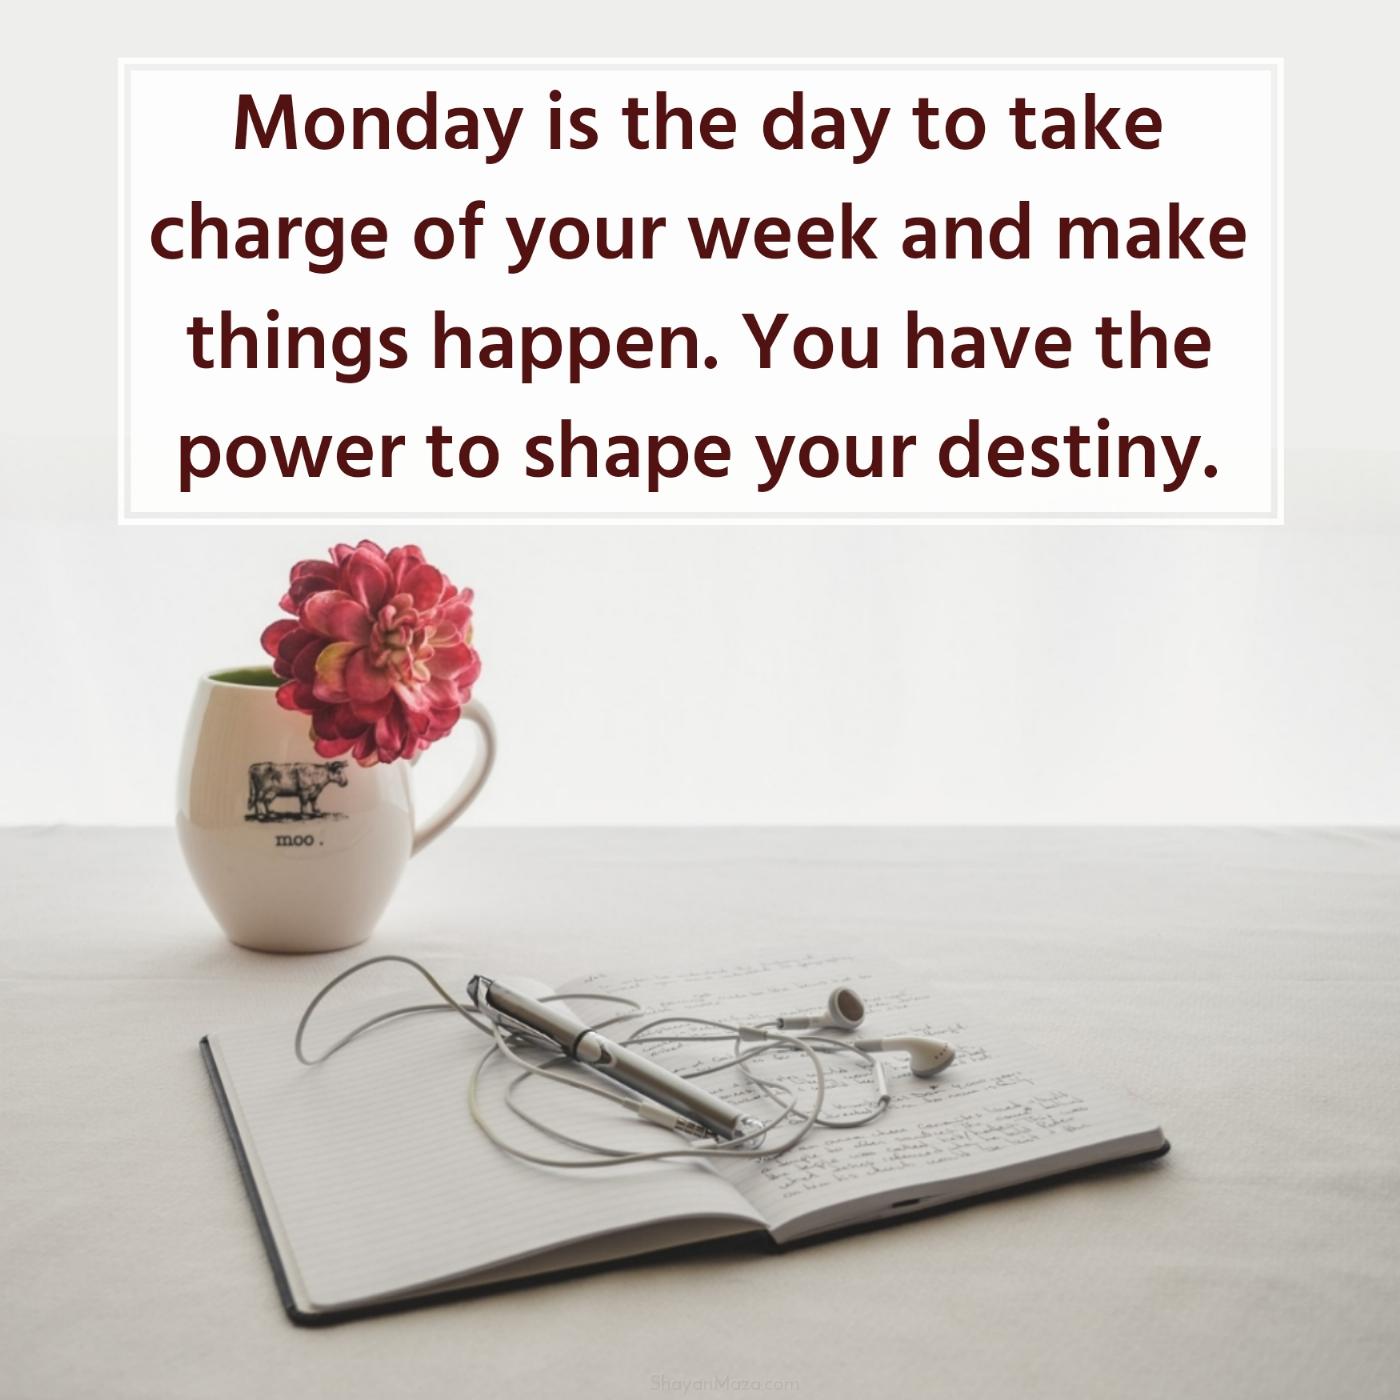 Monday is the day to take charge of your week